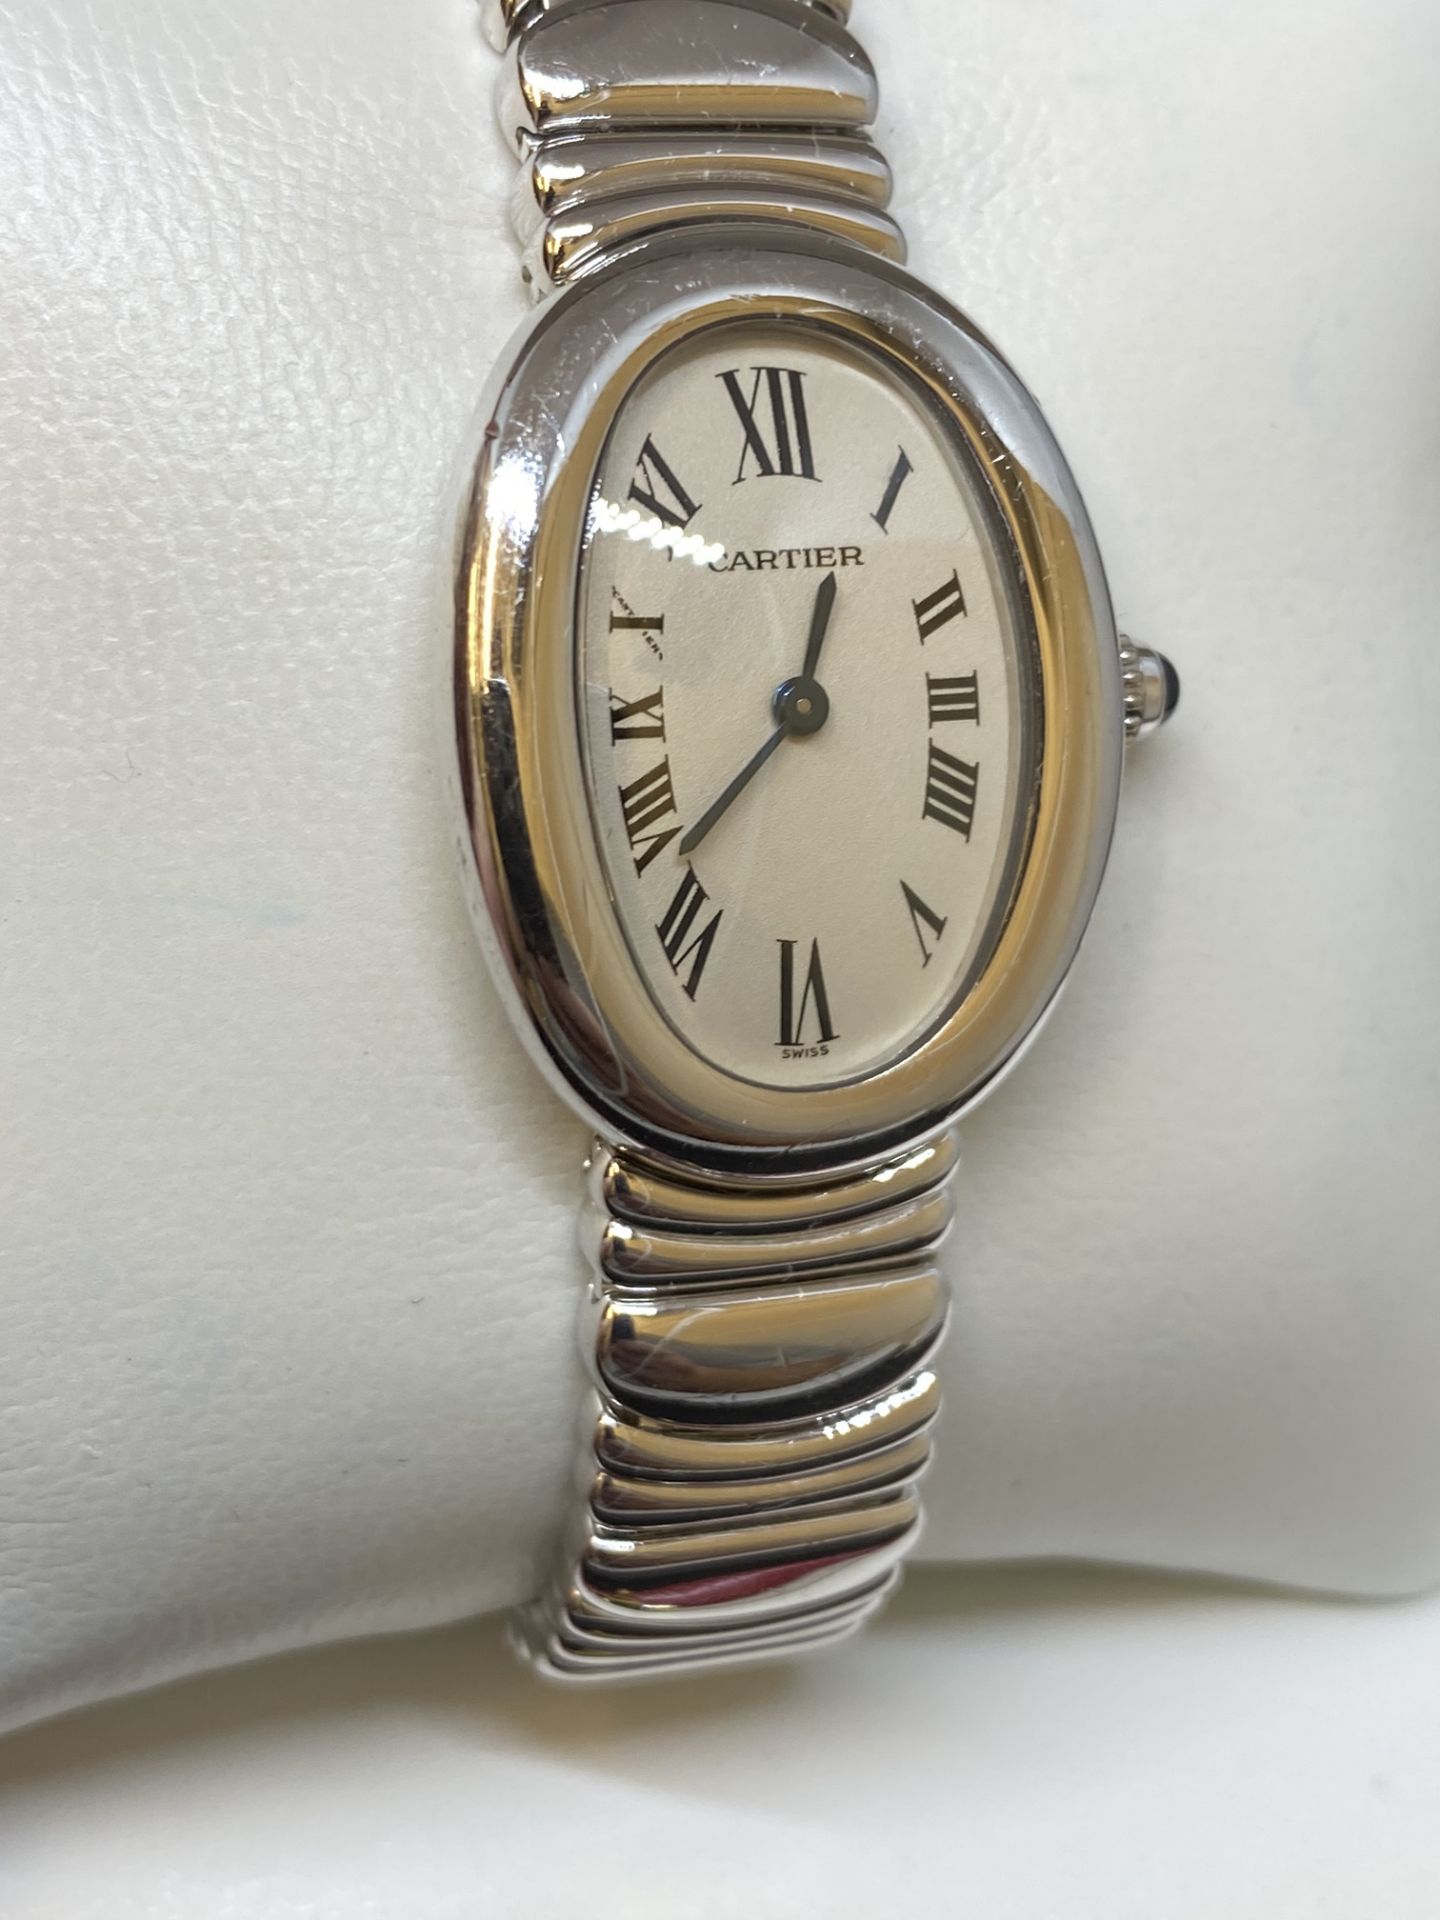 18ct White Gold Cartier Baignoire Mode;: 1955 Watch - Image 5 of 13